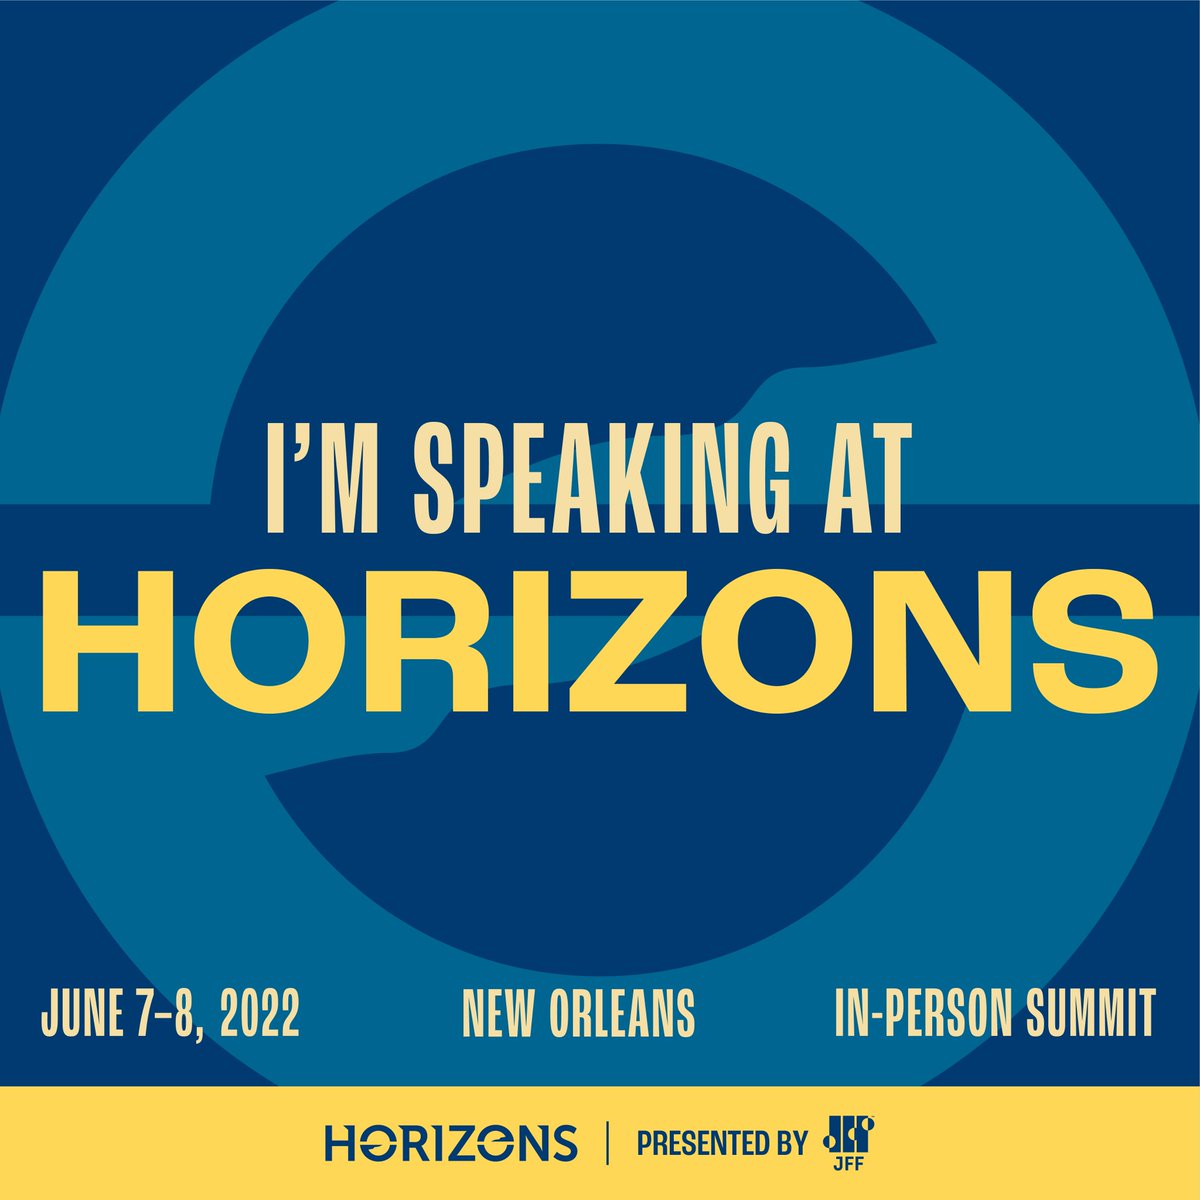 Join me today at 3 pm CDT at #JFFHorizons to discuss how #edtech and apprenticeships can help fill talent gaps and deliver equity. @jfftweets